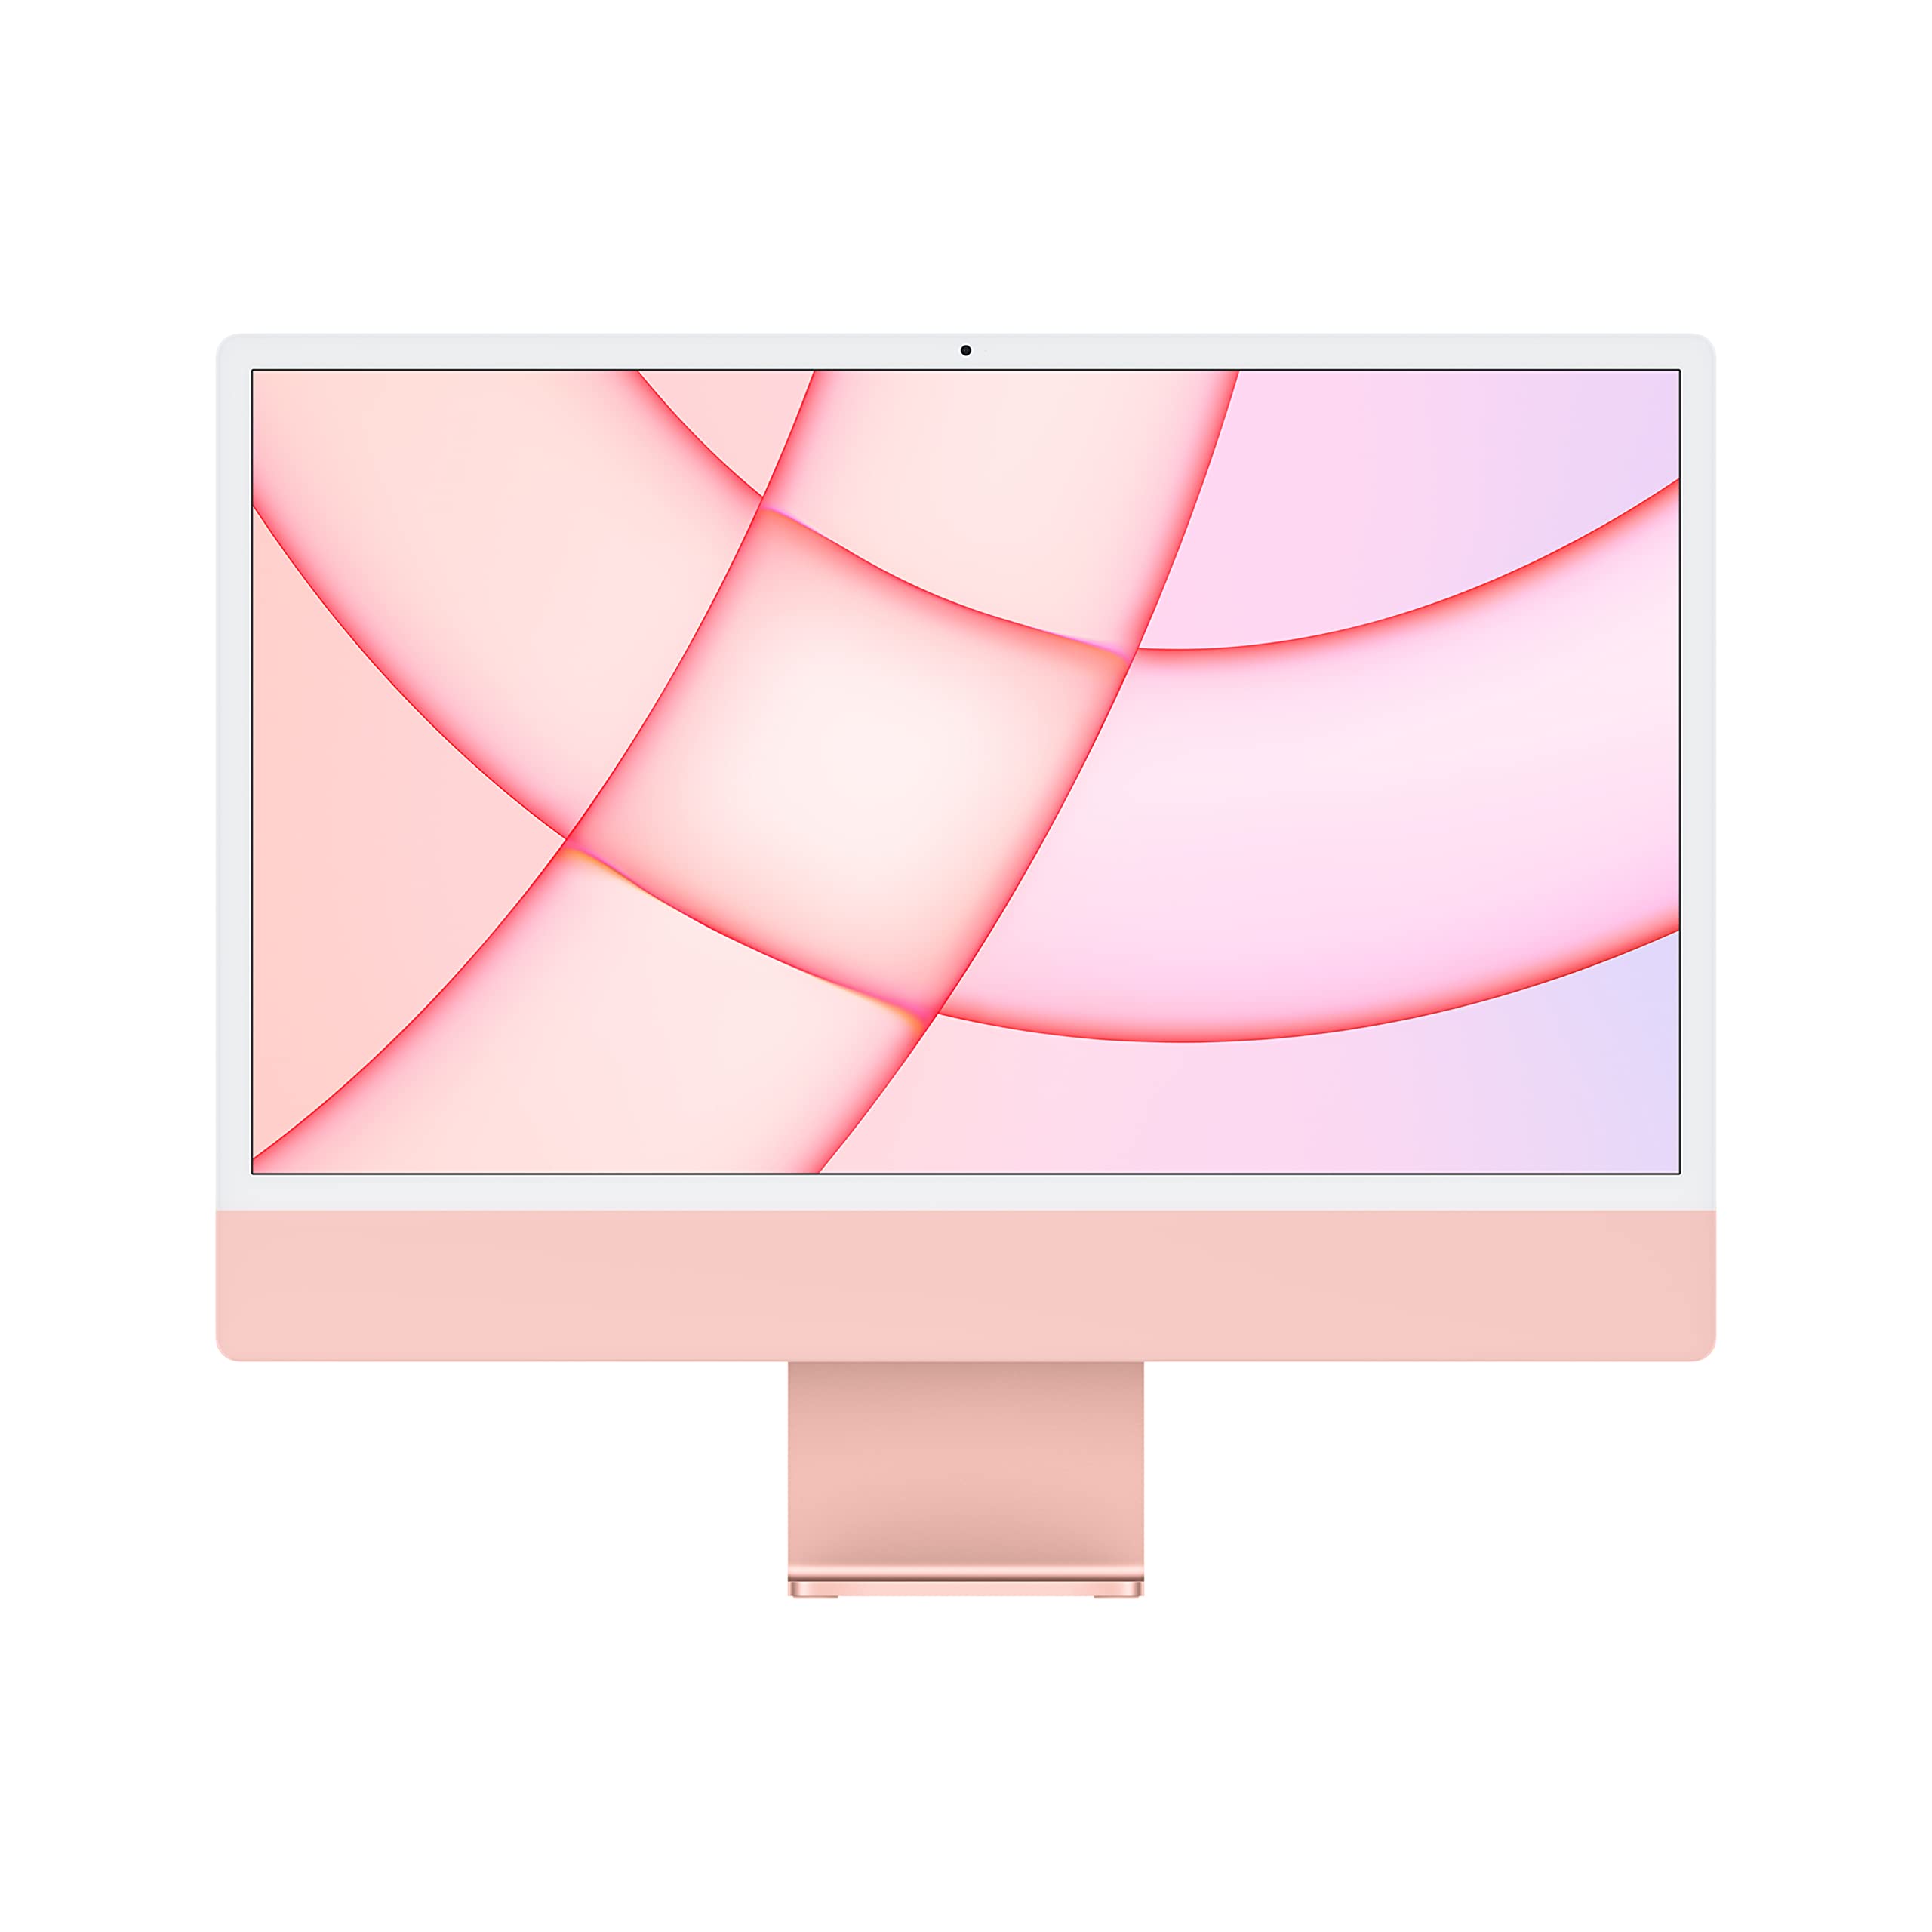 Apple 2021 iMac All in one Desktop Computer with M1 chip: 8-core CPU, 8-core GPU, 24-inch Retina Display, 8GB RAM, 256GB SSD Storage, Matching Accessories. Works with iPhone/iPad; Pink